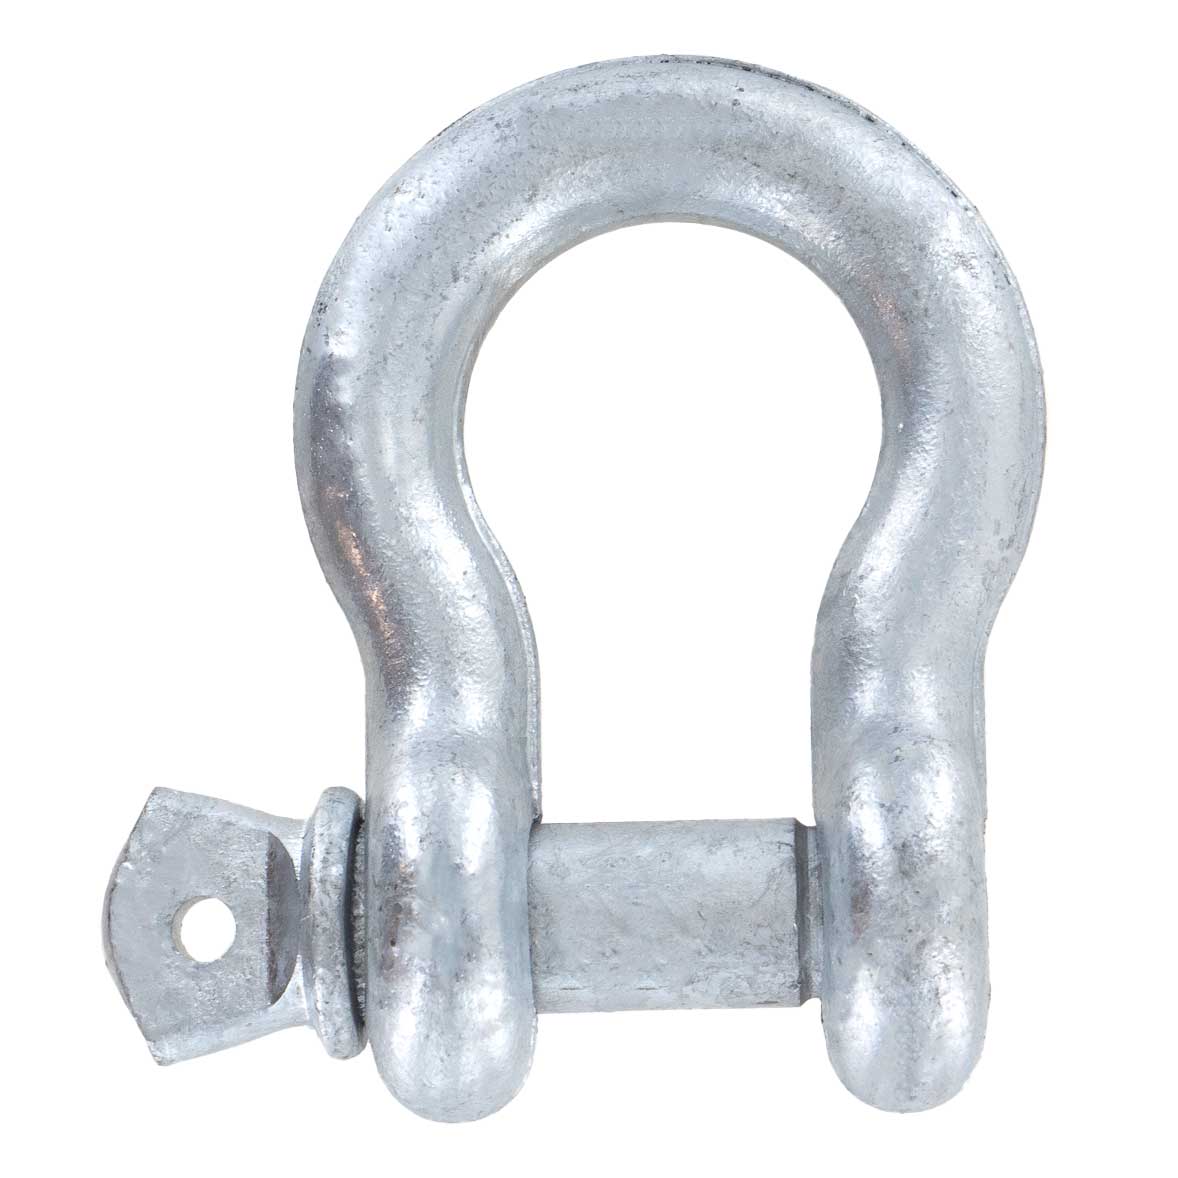 2" Galvanized Screw Pin Anchor Shackle - 35 Ton rear view